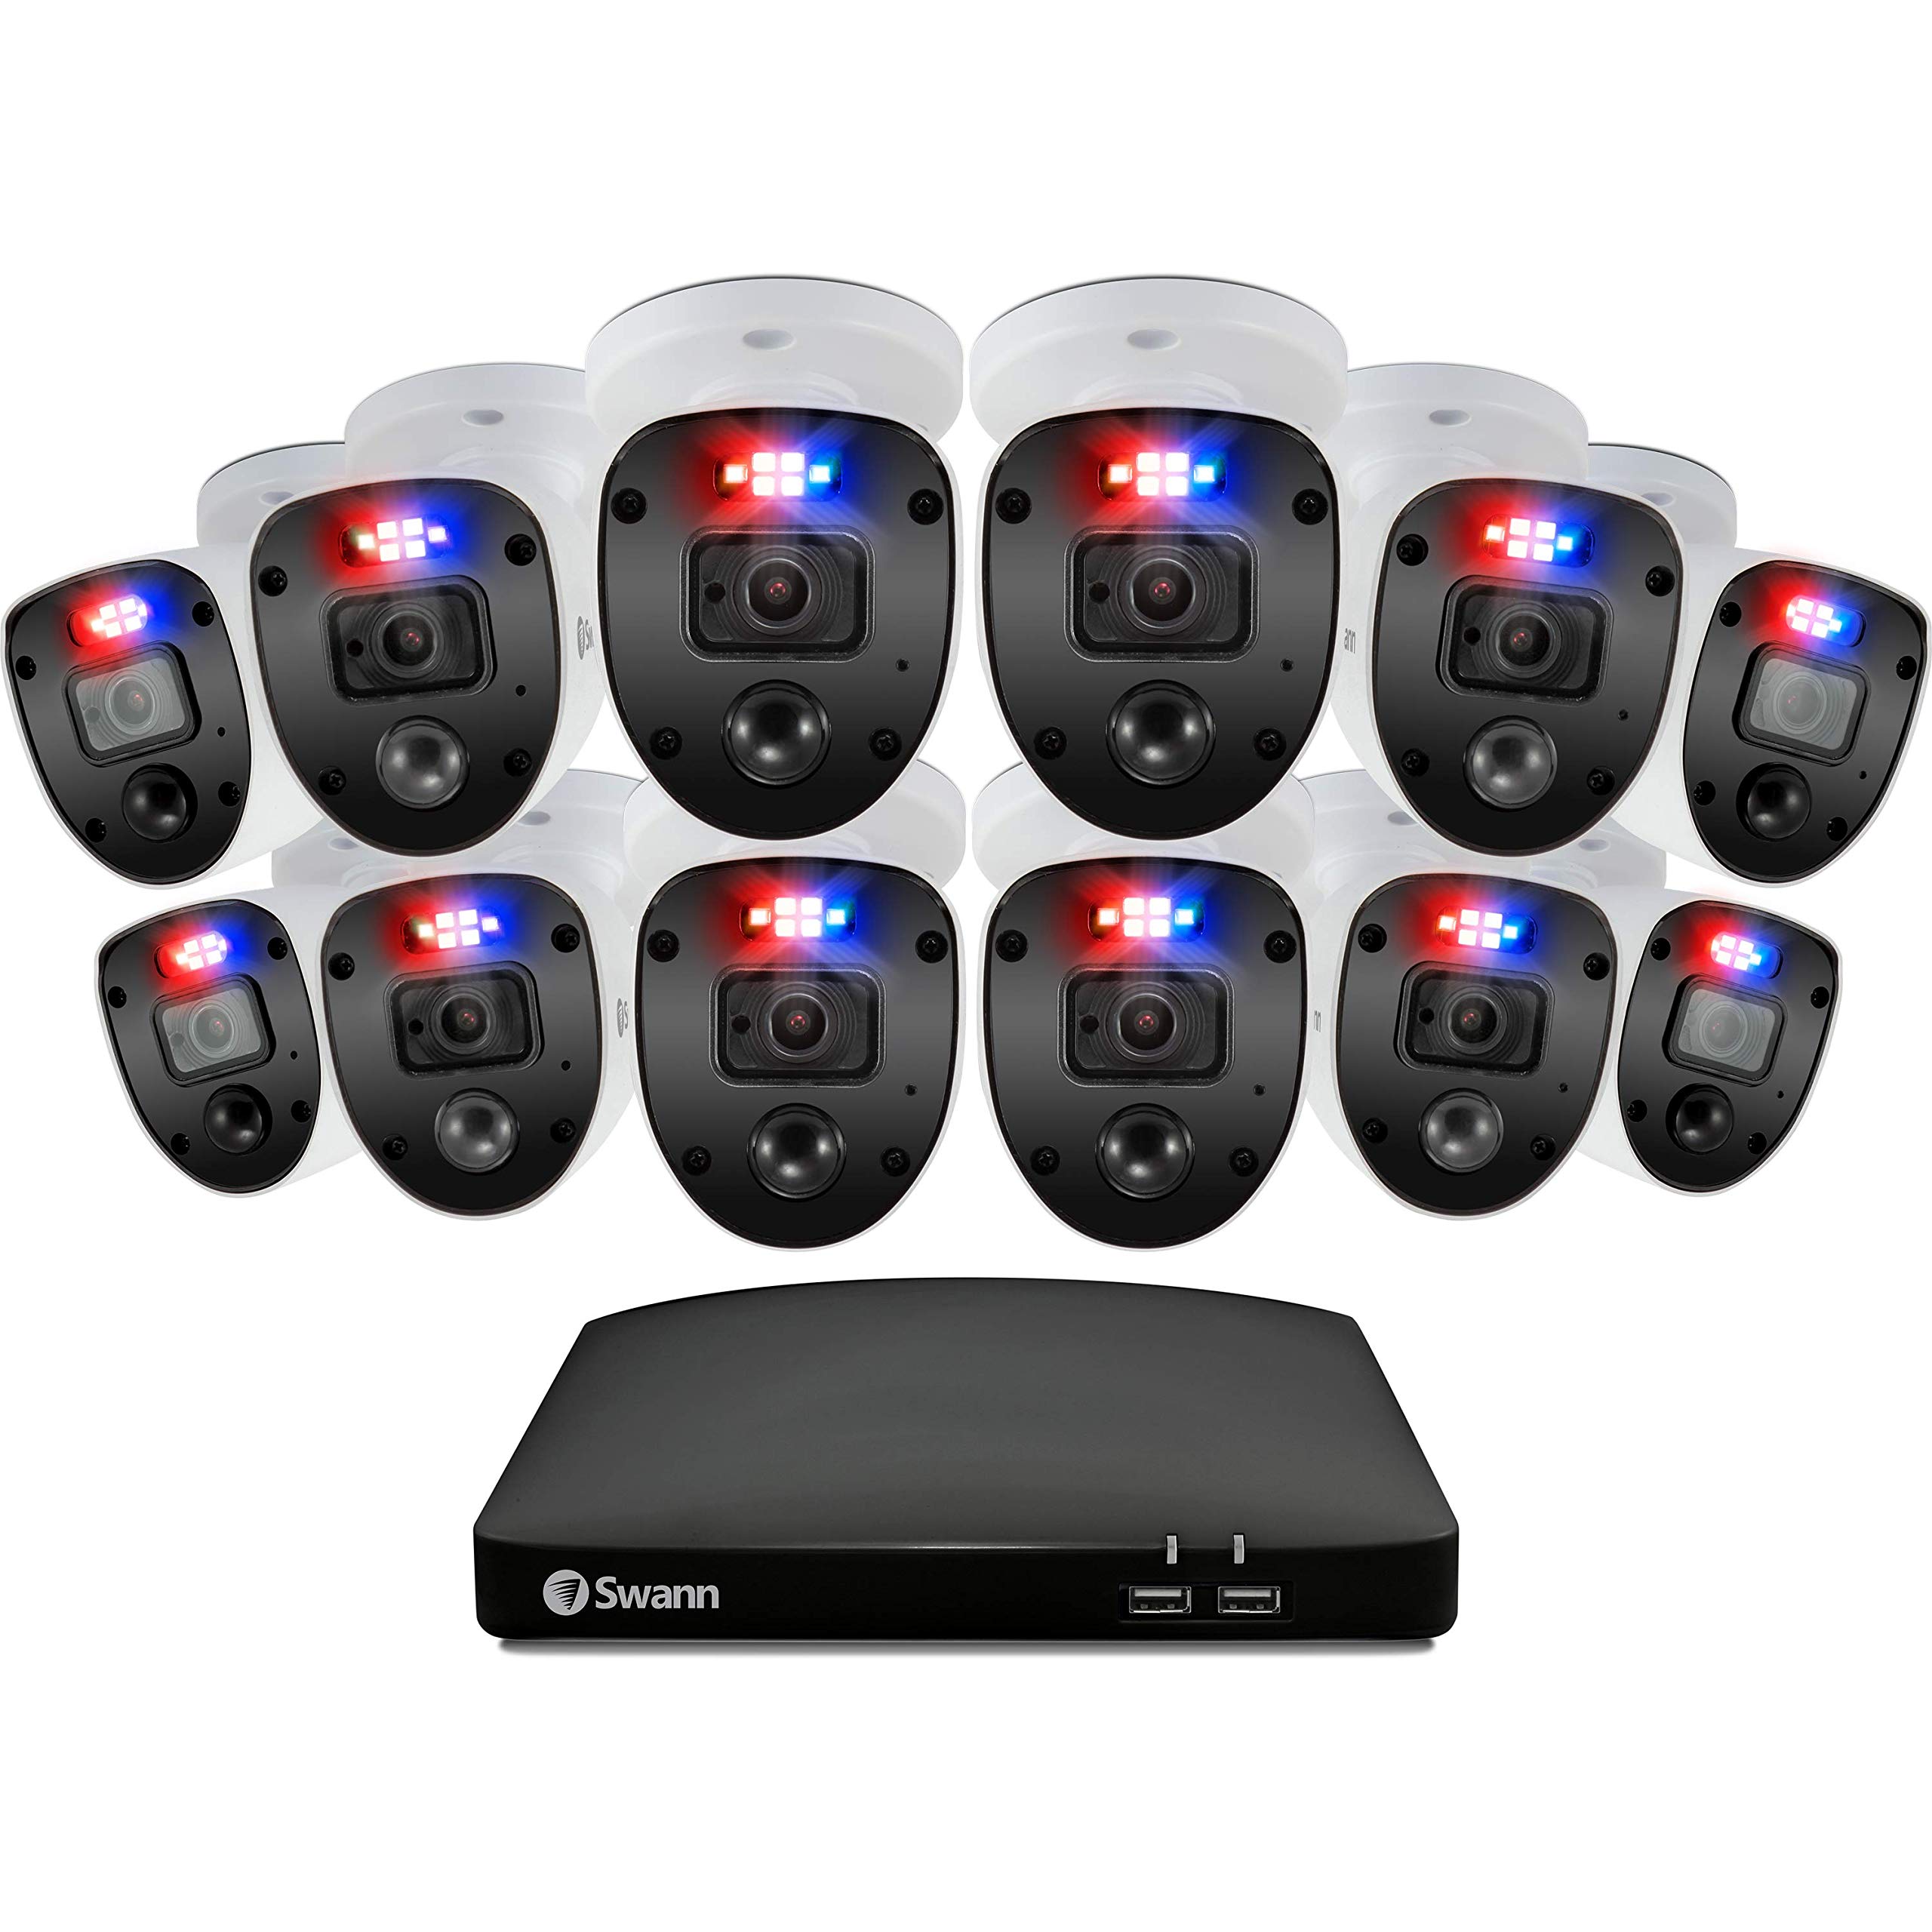 Swann Home DVR Enforcer™ Security Cam System with 2TB HDD, 16 Channel 12 Camera, 1080p Video, Indoor or Outdoor Wired Surveillance CCTV, Color Night Vision, Heat Motion Detection, LED Lights, 16468012